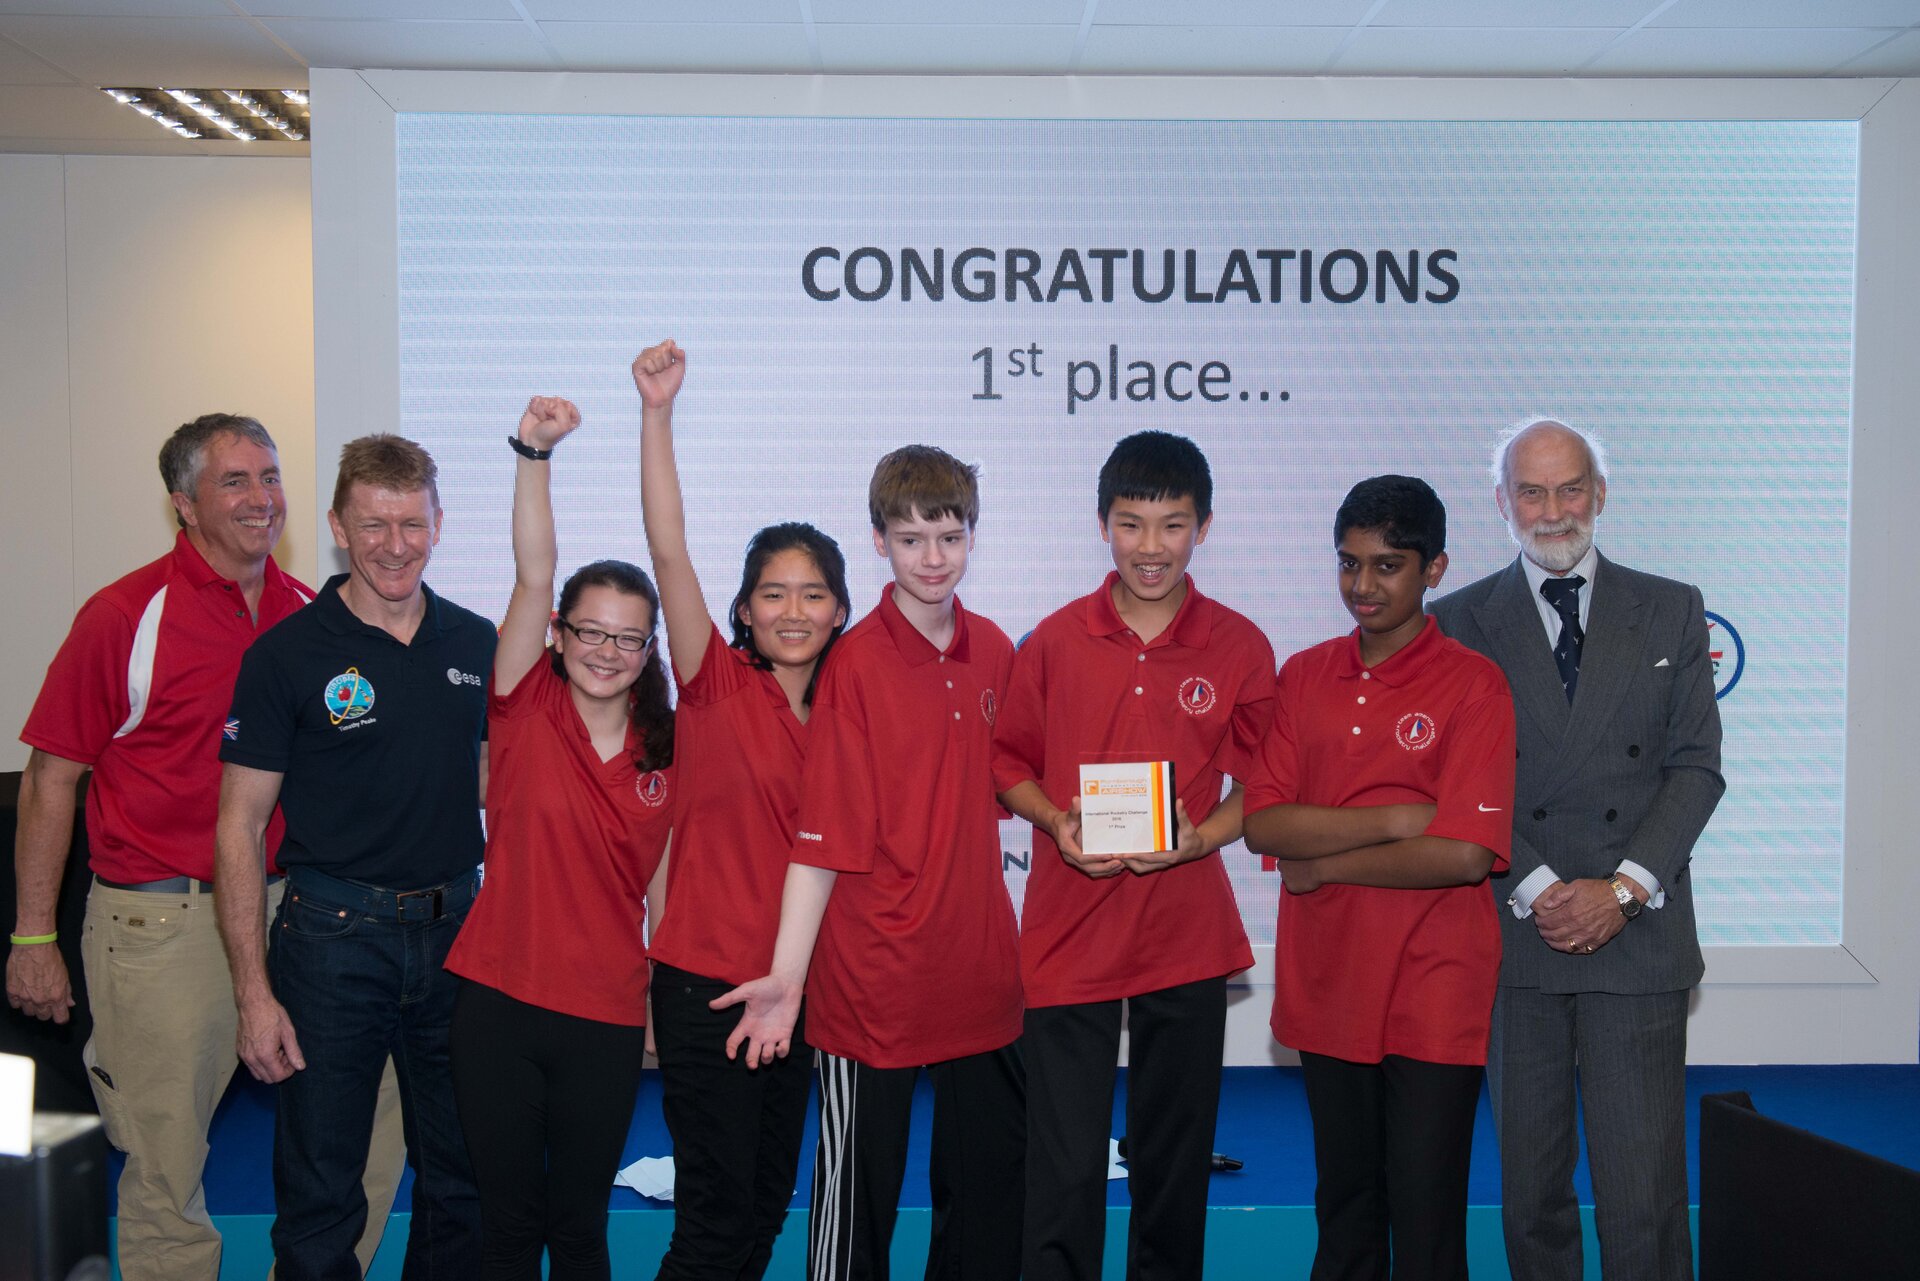 Tim Peake with the winners of International Rocketry Competition 2016